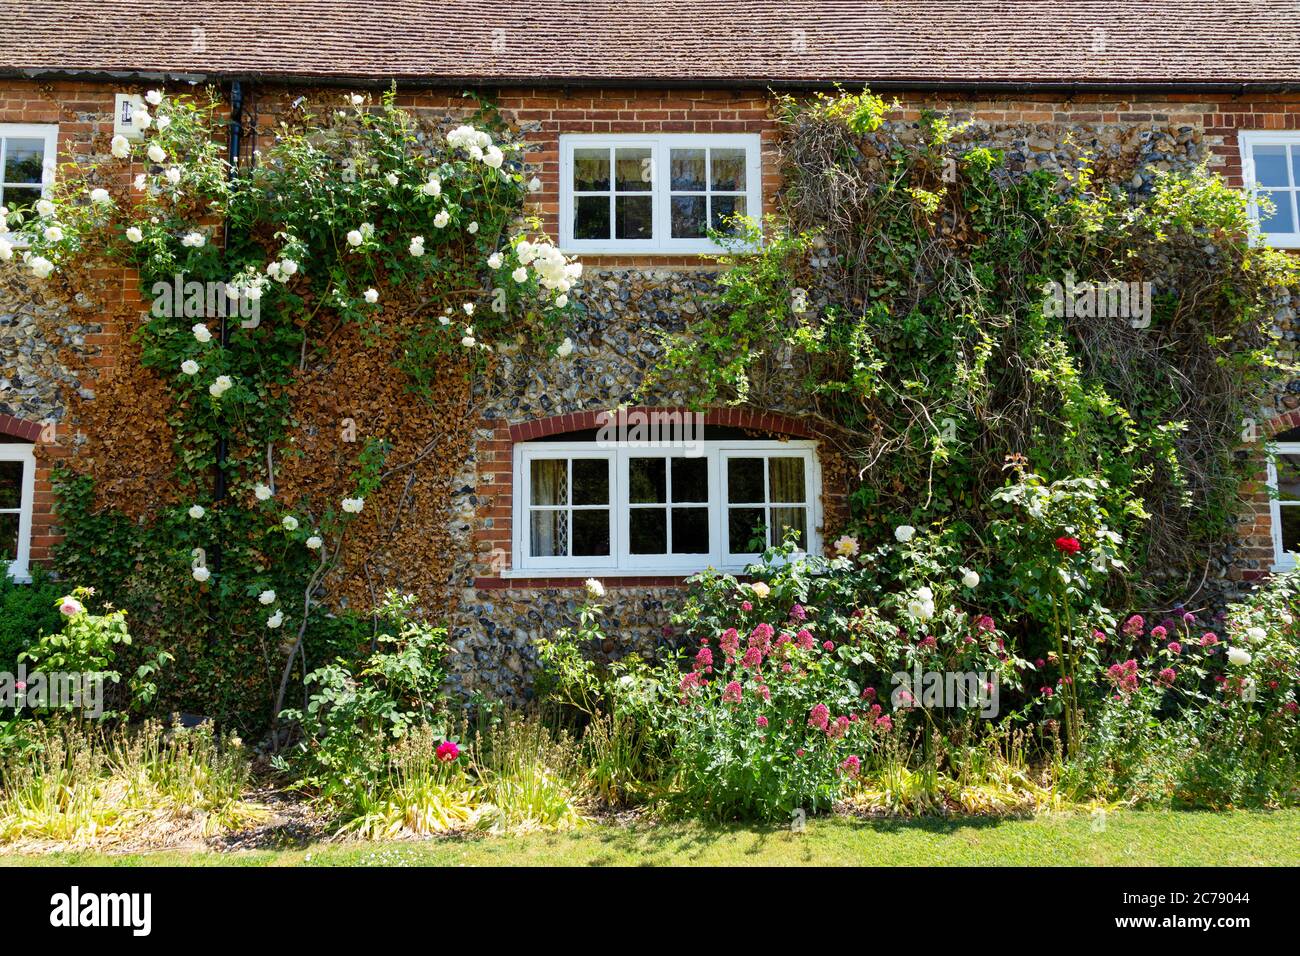 English country cottage and cottage garden with climbing plants on the walls in summer; Dalham village, Dalham Suffolk England UK Stock Photo